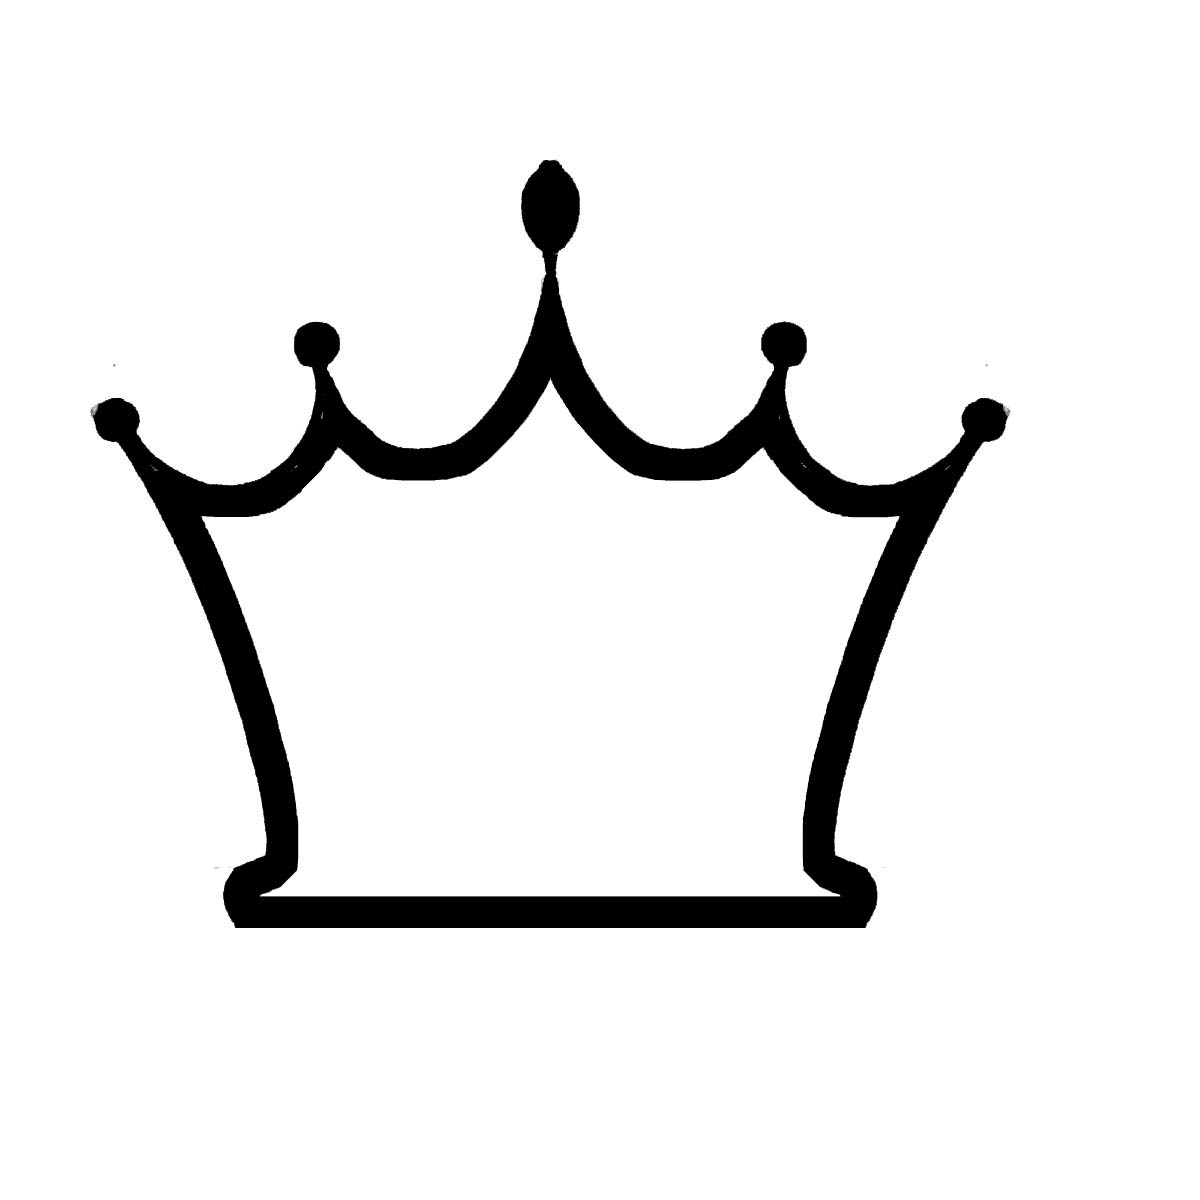 king and queen crowns clipart